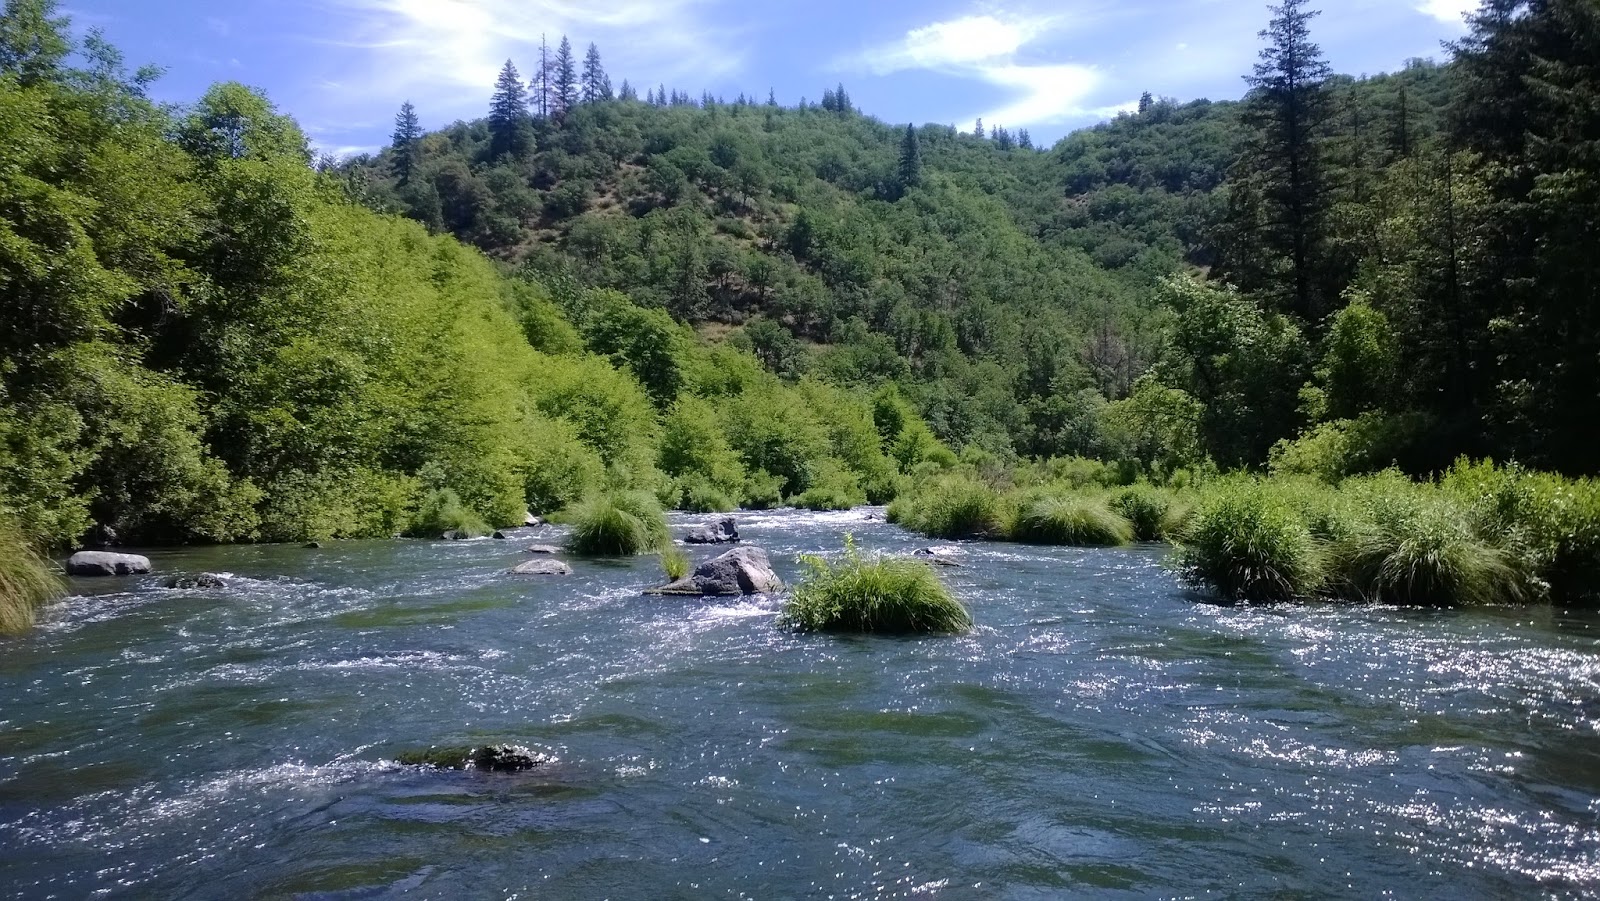 The Most Notorious River In California